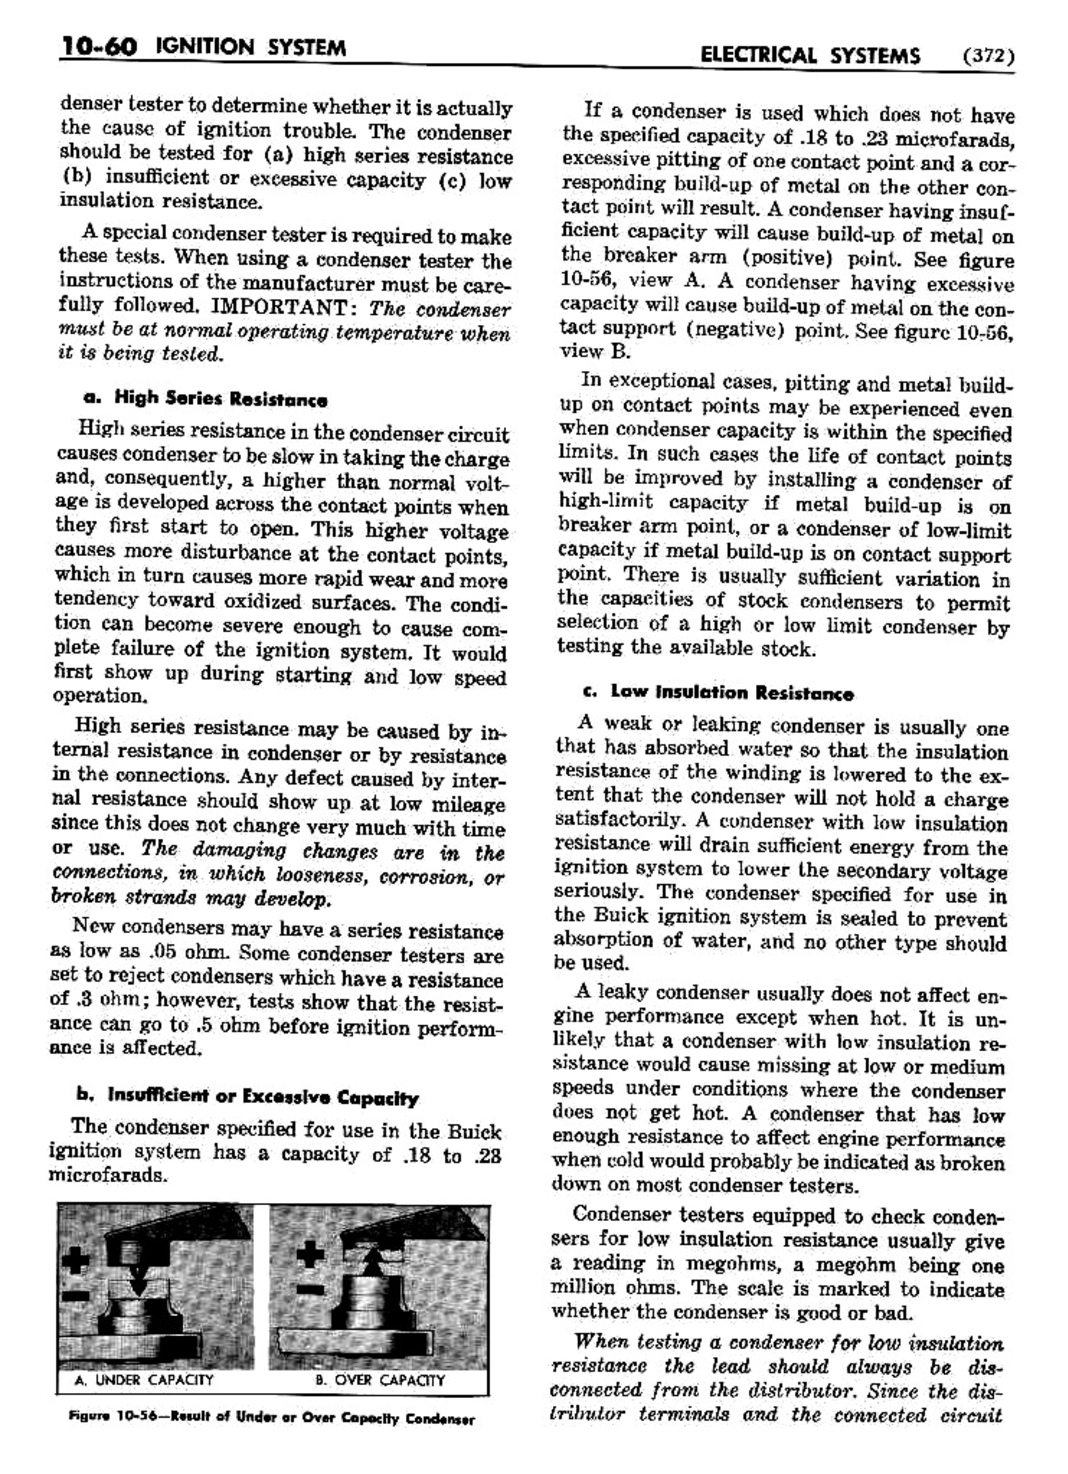 n_11 1954 Buick Shop Manual - Electrical Systems-060-060.jpg